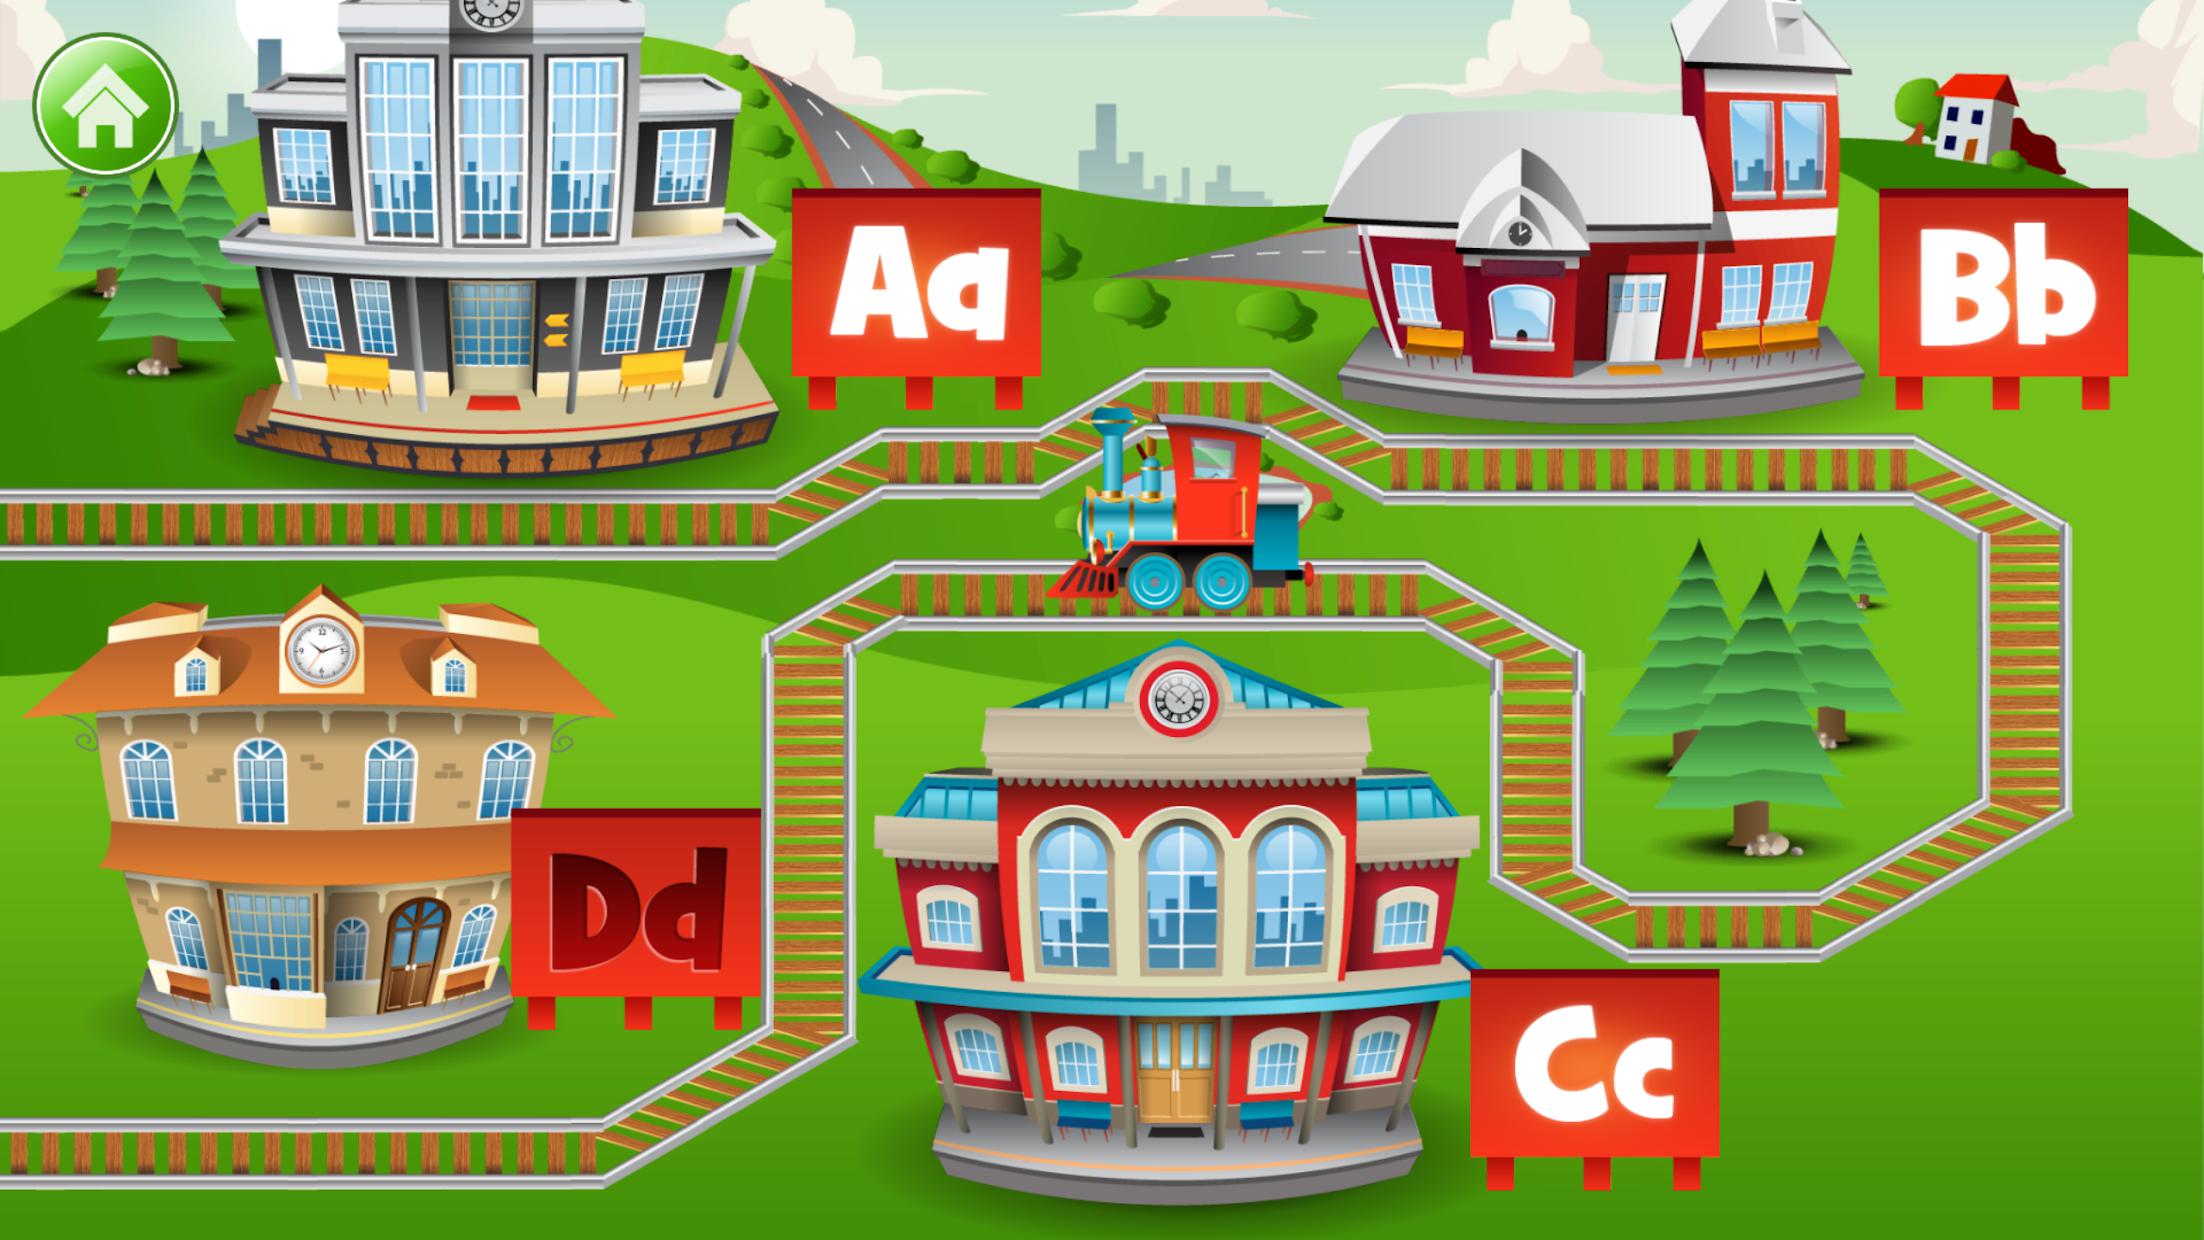 Learn Letter Names and Sounds with ABC Trains_截图_3